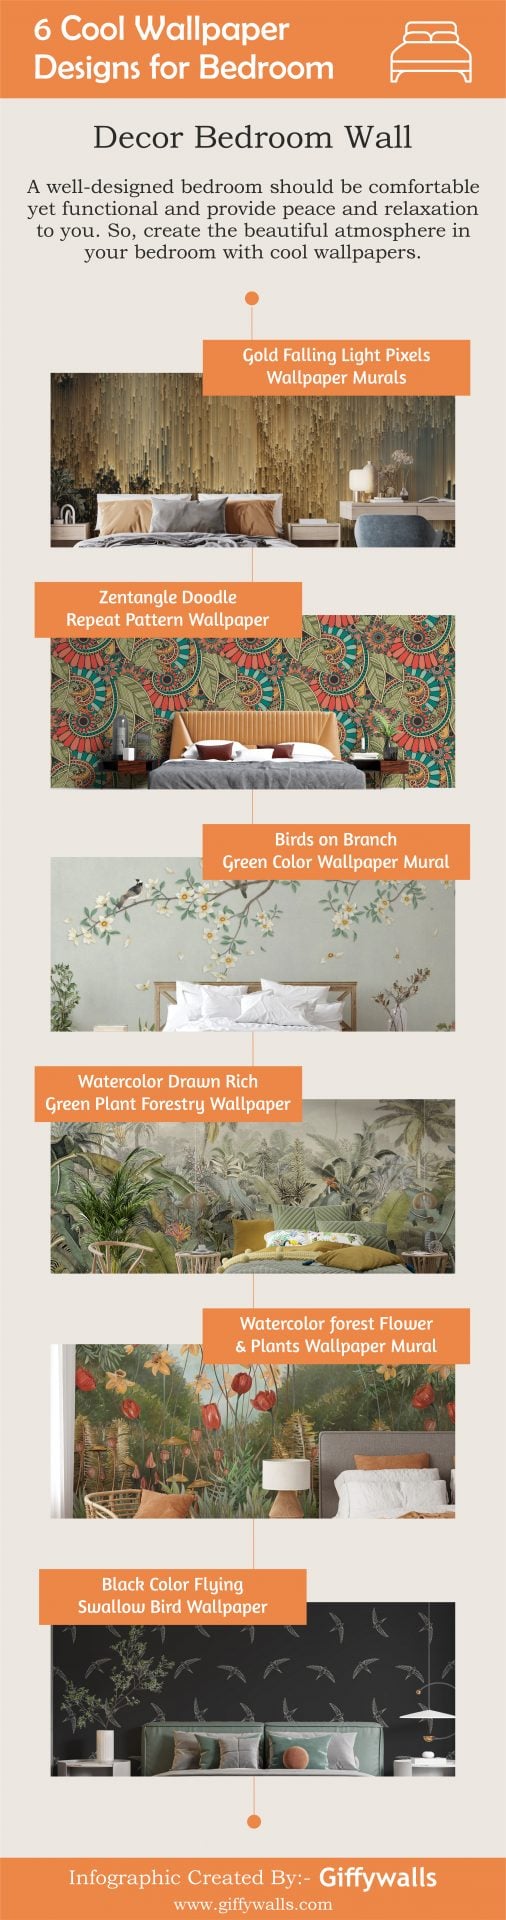 6 Cool Wallpaper Designs for Bedroom Infographic